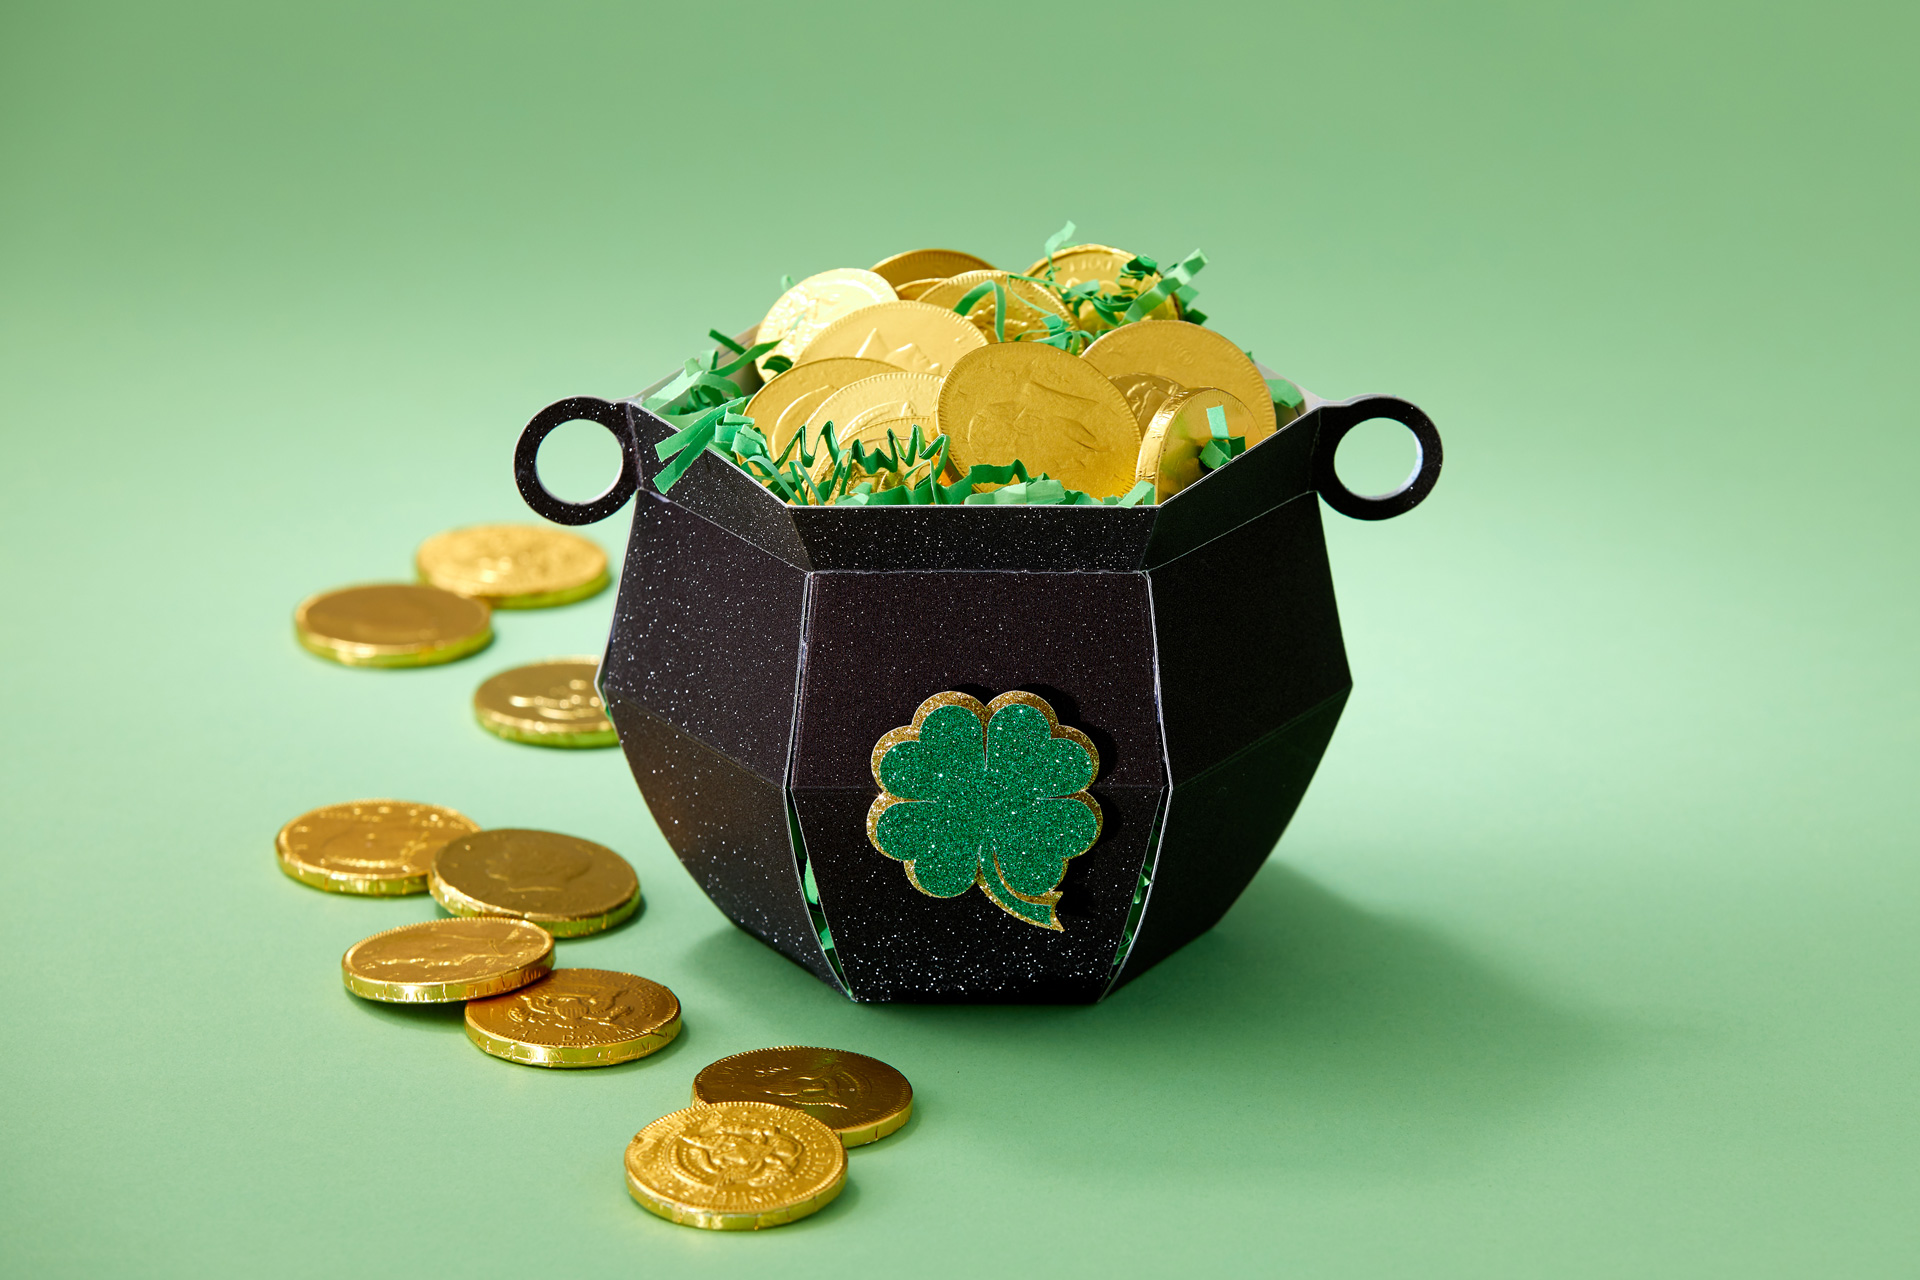 DIY your luck with these St. Patrick